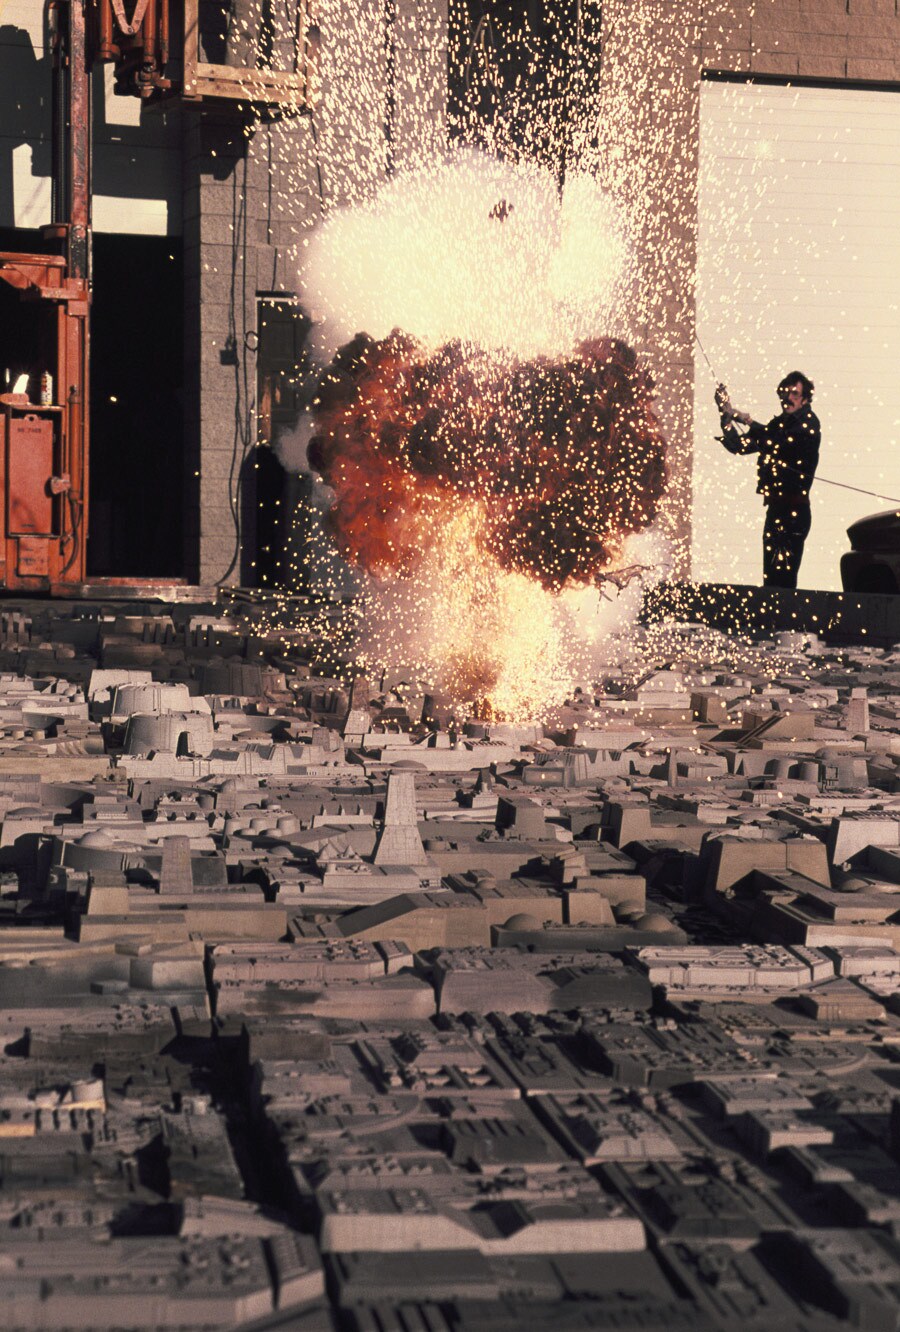 Model maker Paul Huston sets off an explosion on the surface of a model from Star Wars: A New Hope.